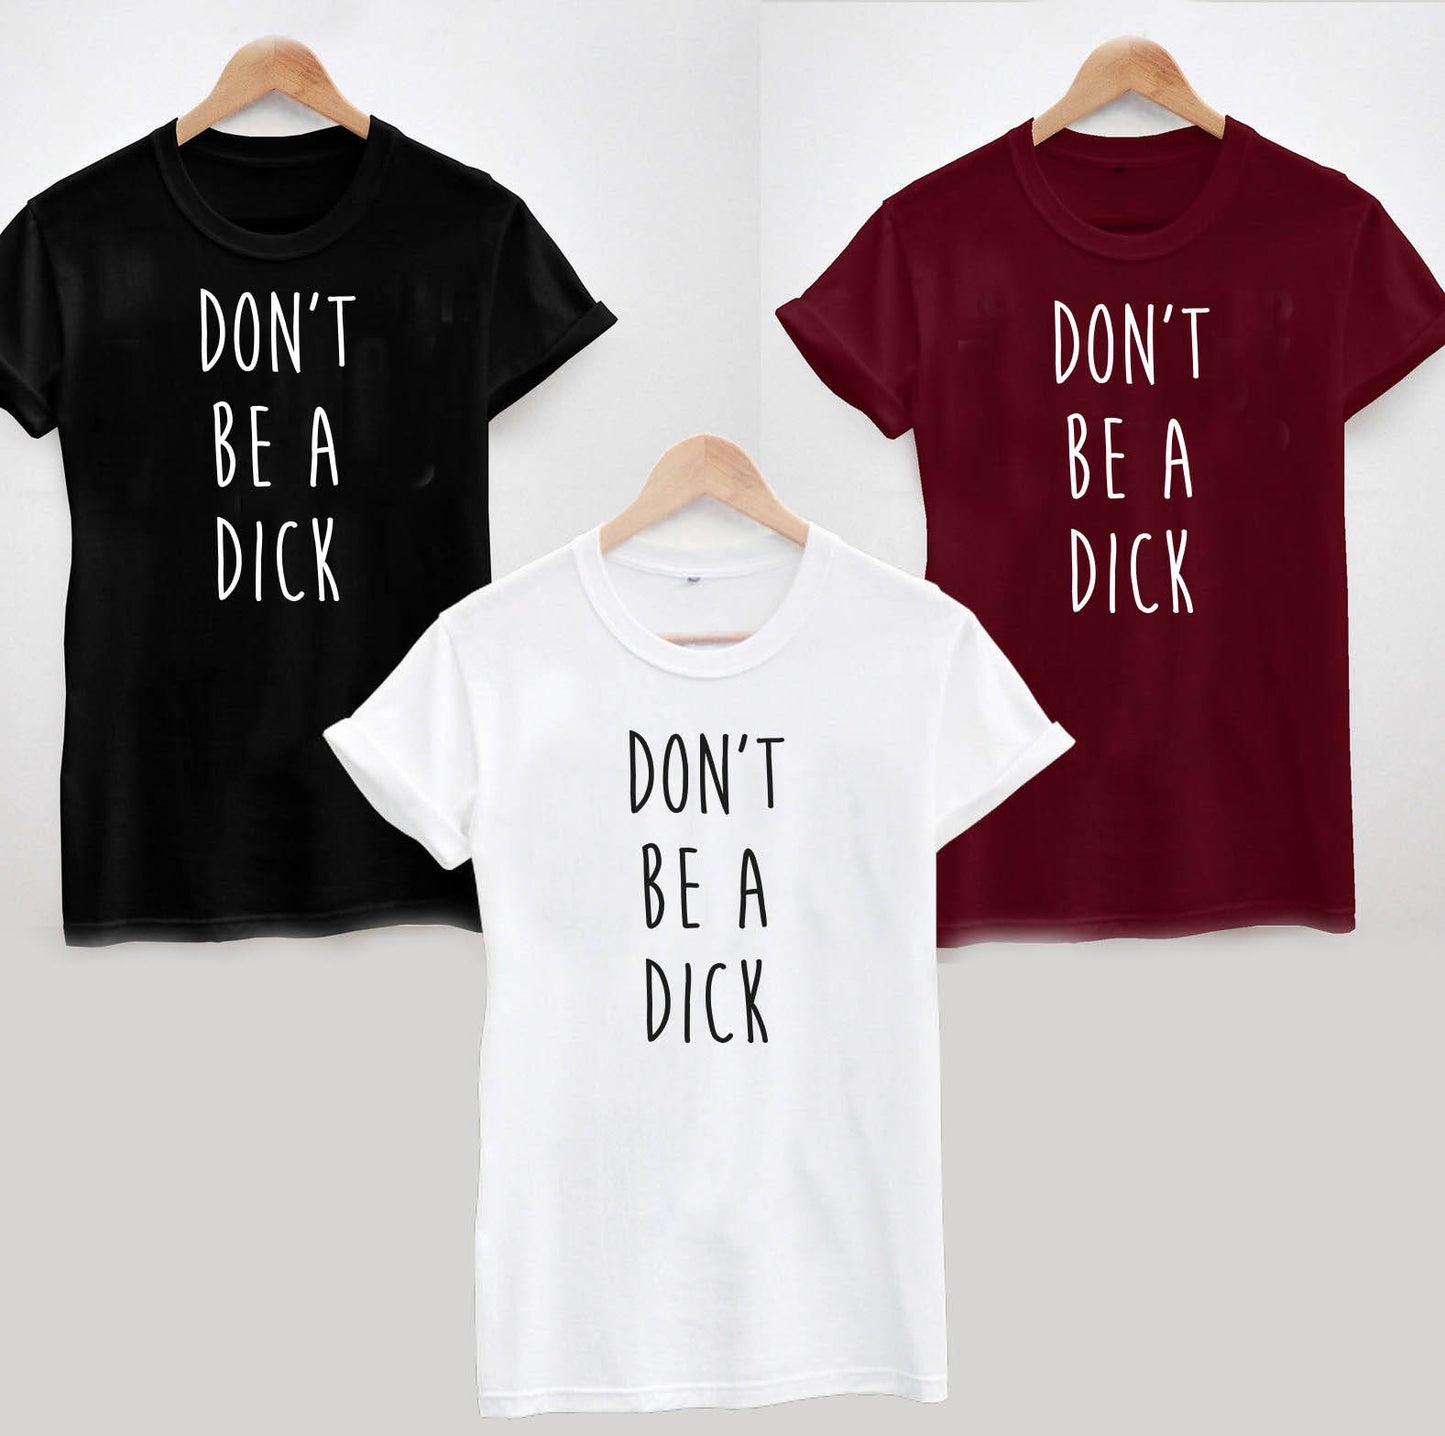 Don't Be A Dick T-Shirt - Funny Rude Joke Cool Tee Top Sarcastic